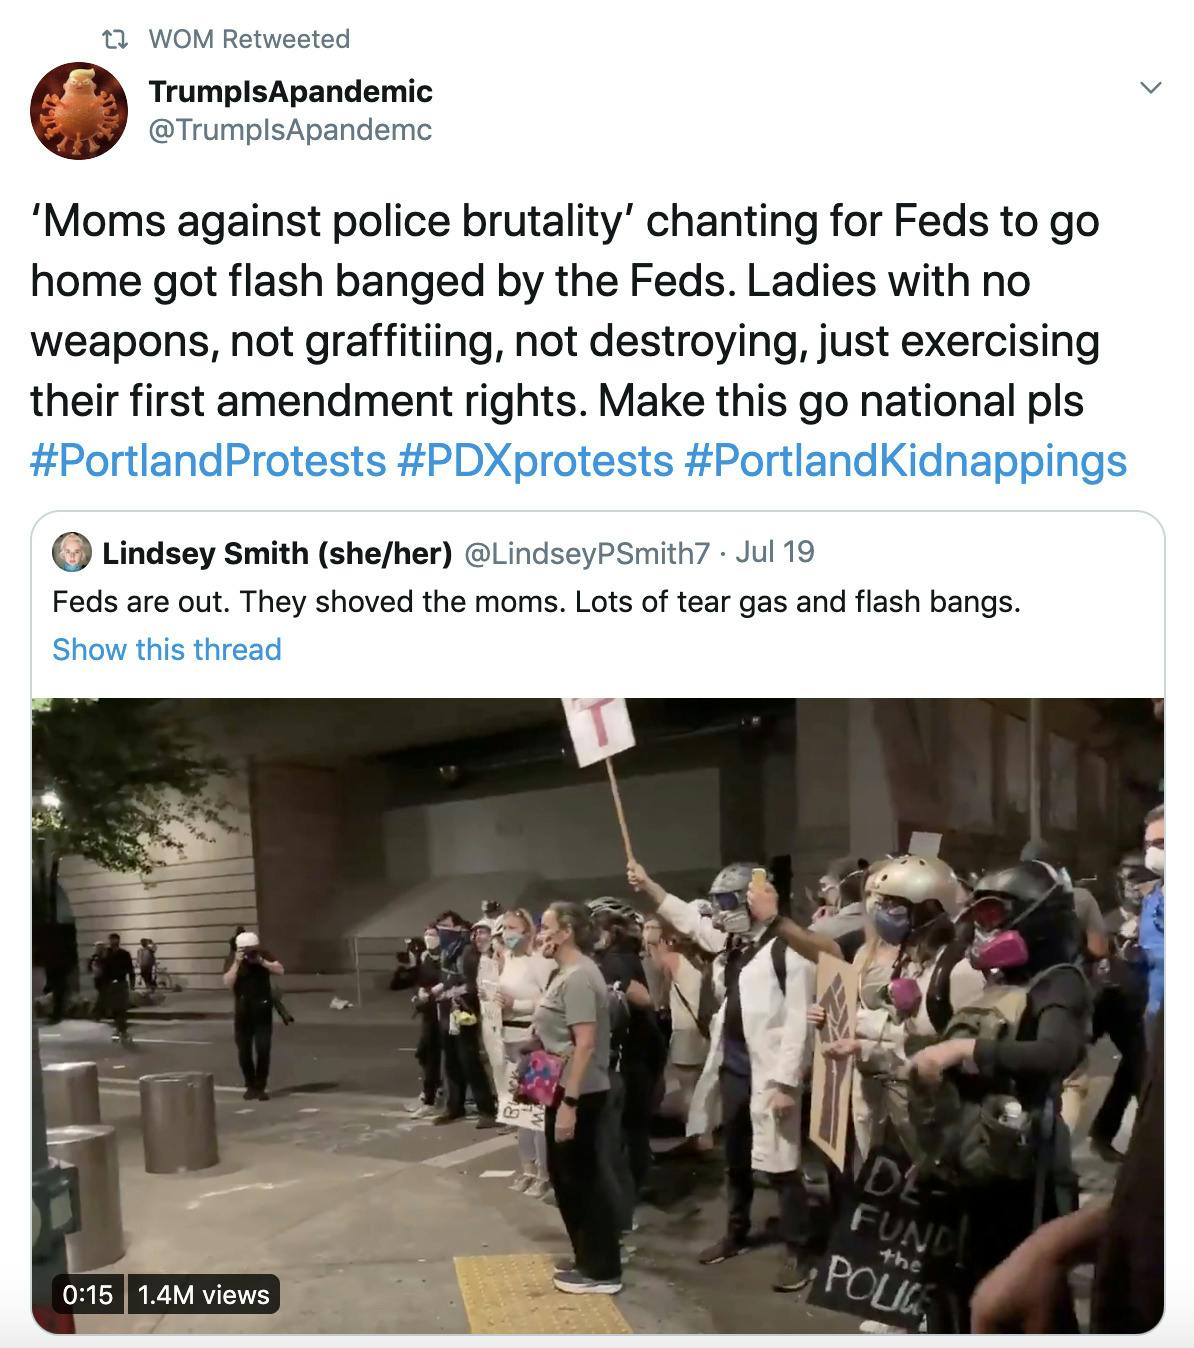 ‘Moms against police brutality’ chanting for Feds to go home got flash banged by the Feds. Ladies with no weapons, not graffitiing, not destroying, just exercising their first amendment rights. Make this go national pls #PortlandProtests #PDXprotests #PortlandKidnappings